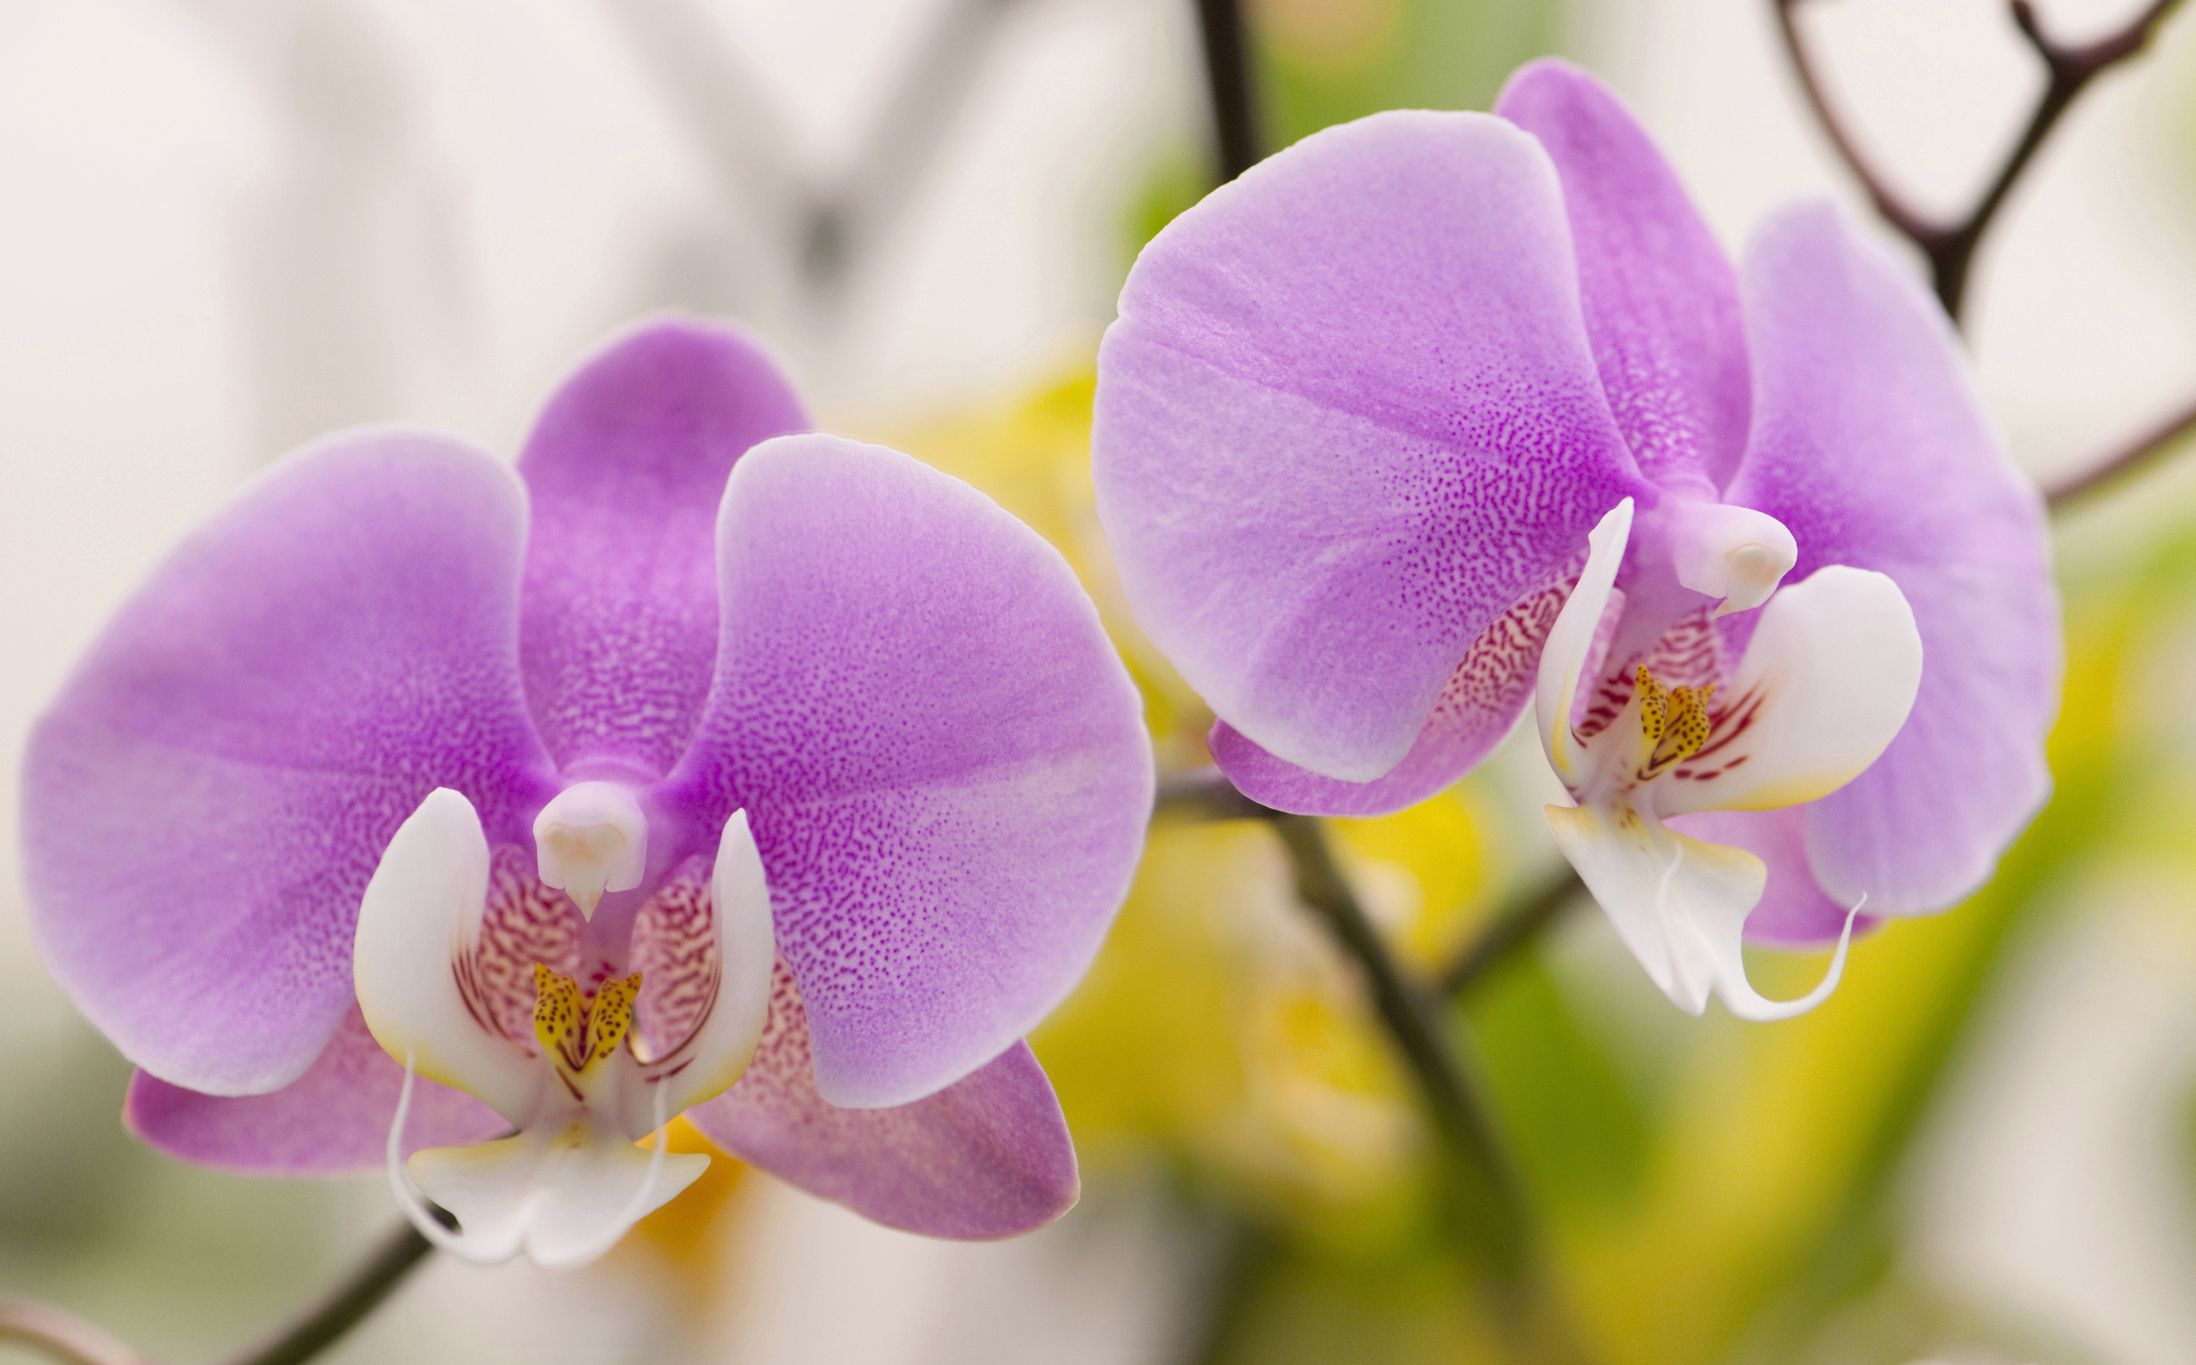 Tips on Growing Phalaenopsis Orchids